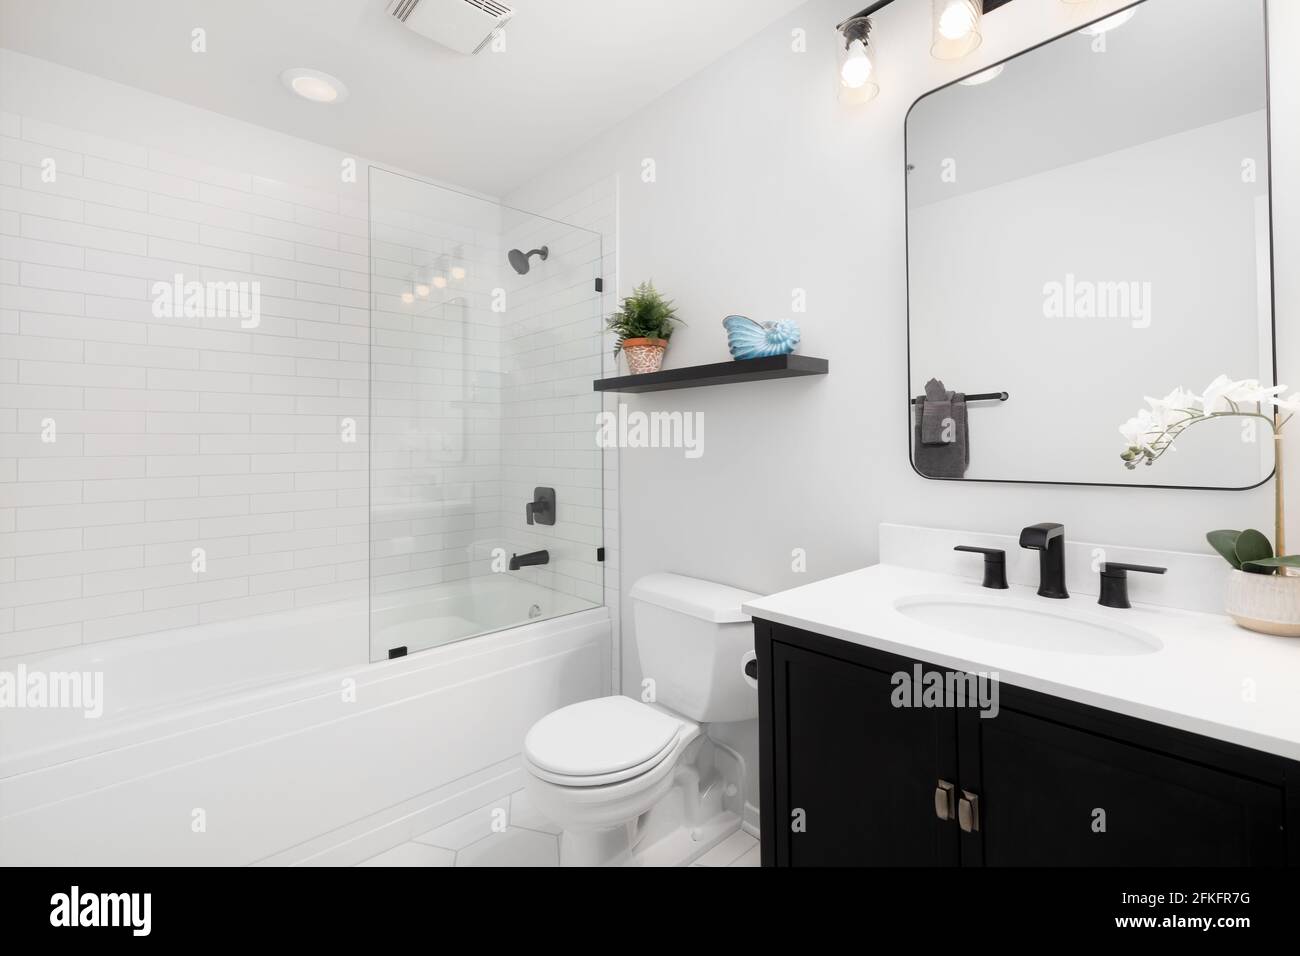 A small modern bathroom with a dark vanity, square mirror,  white subway tiles line the bathtub and shower with black faucets. Stock Photo